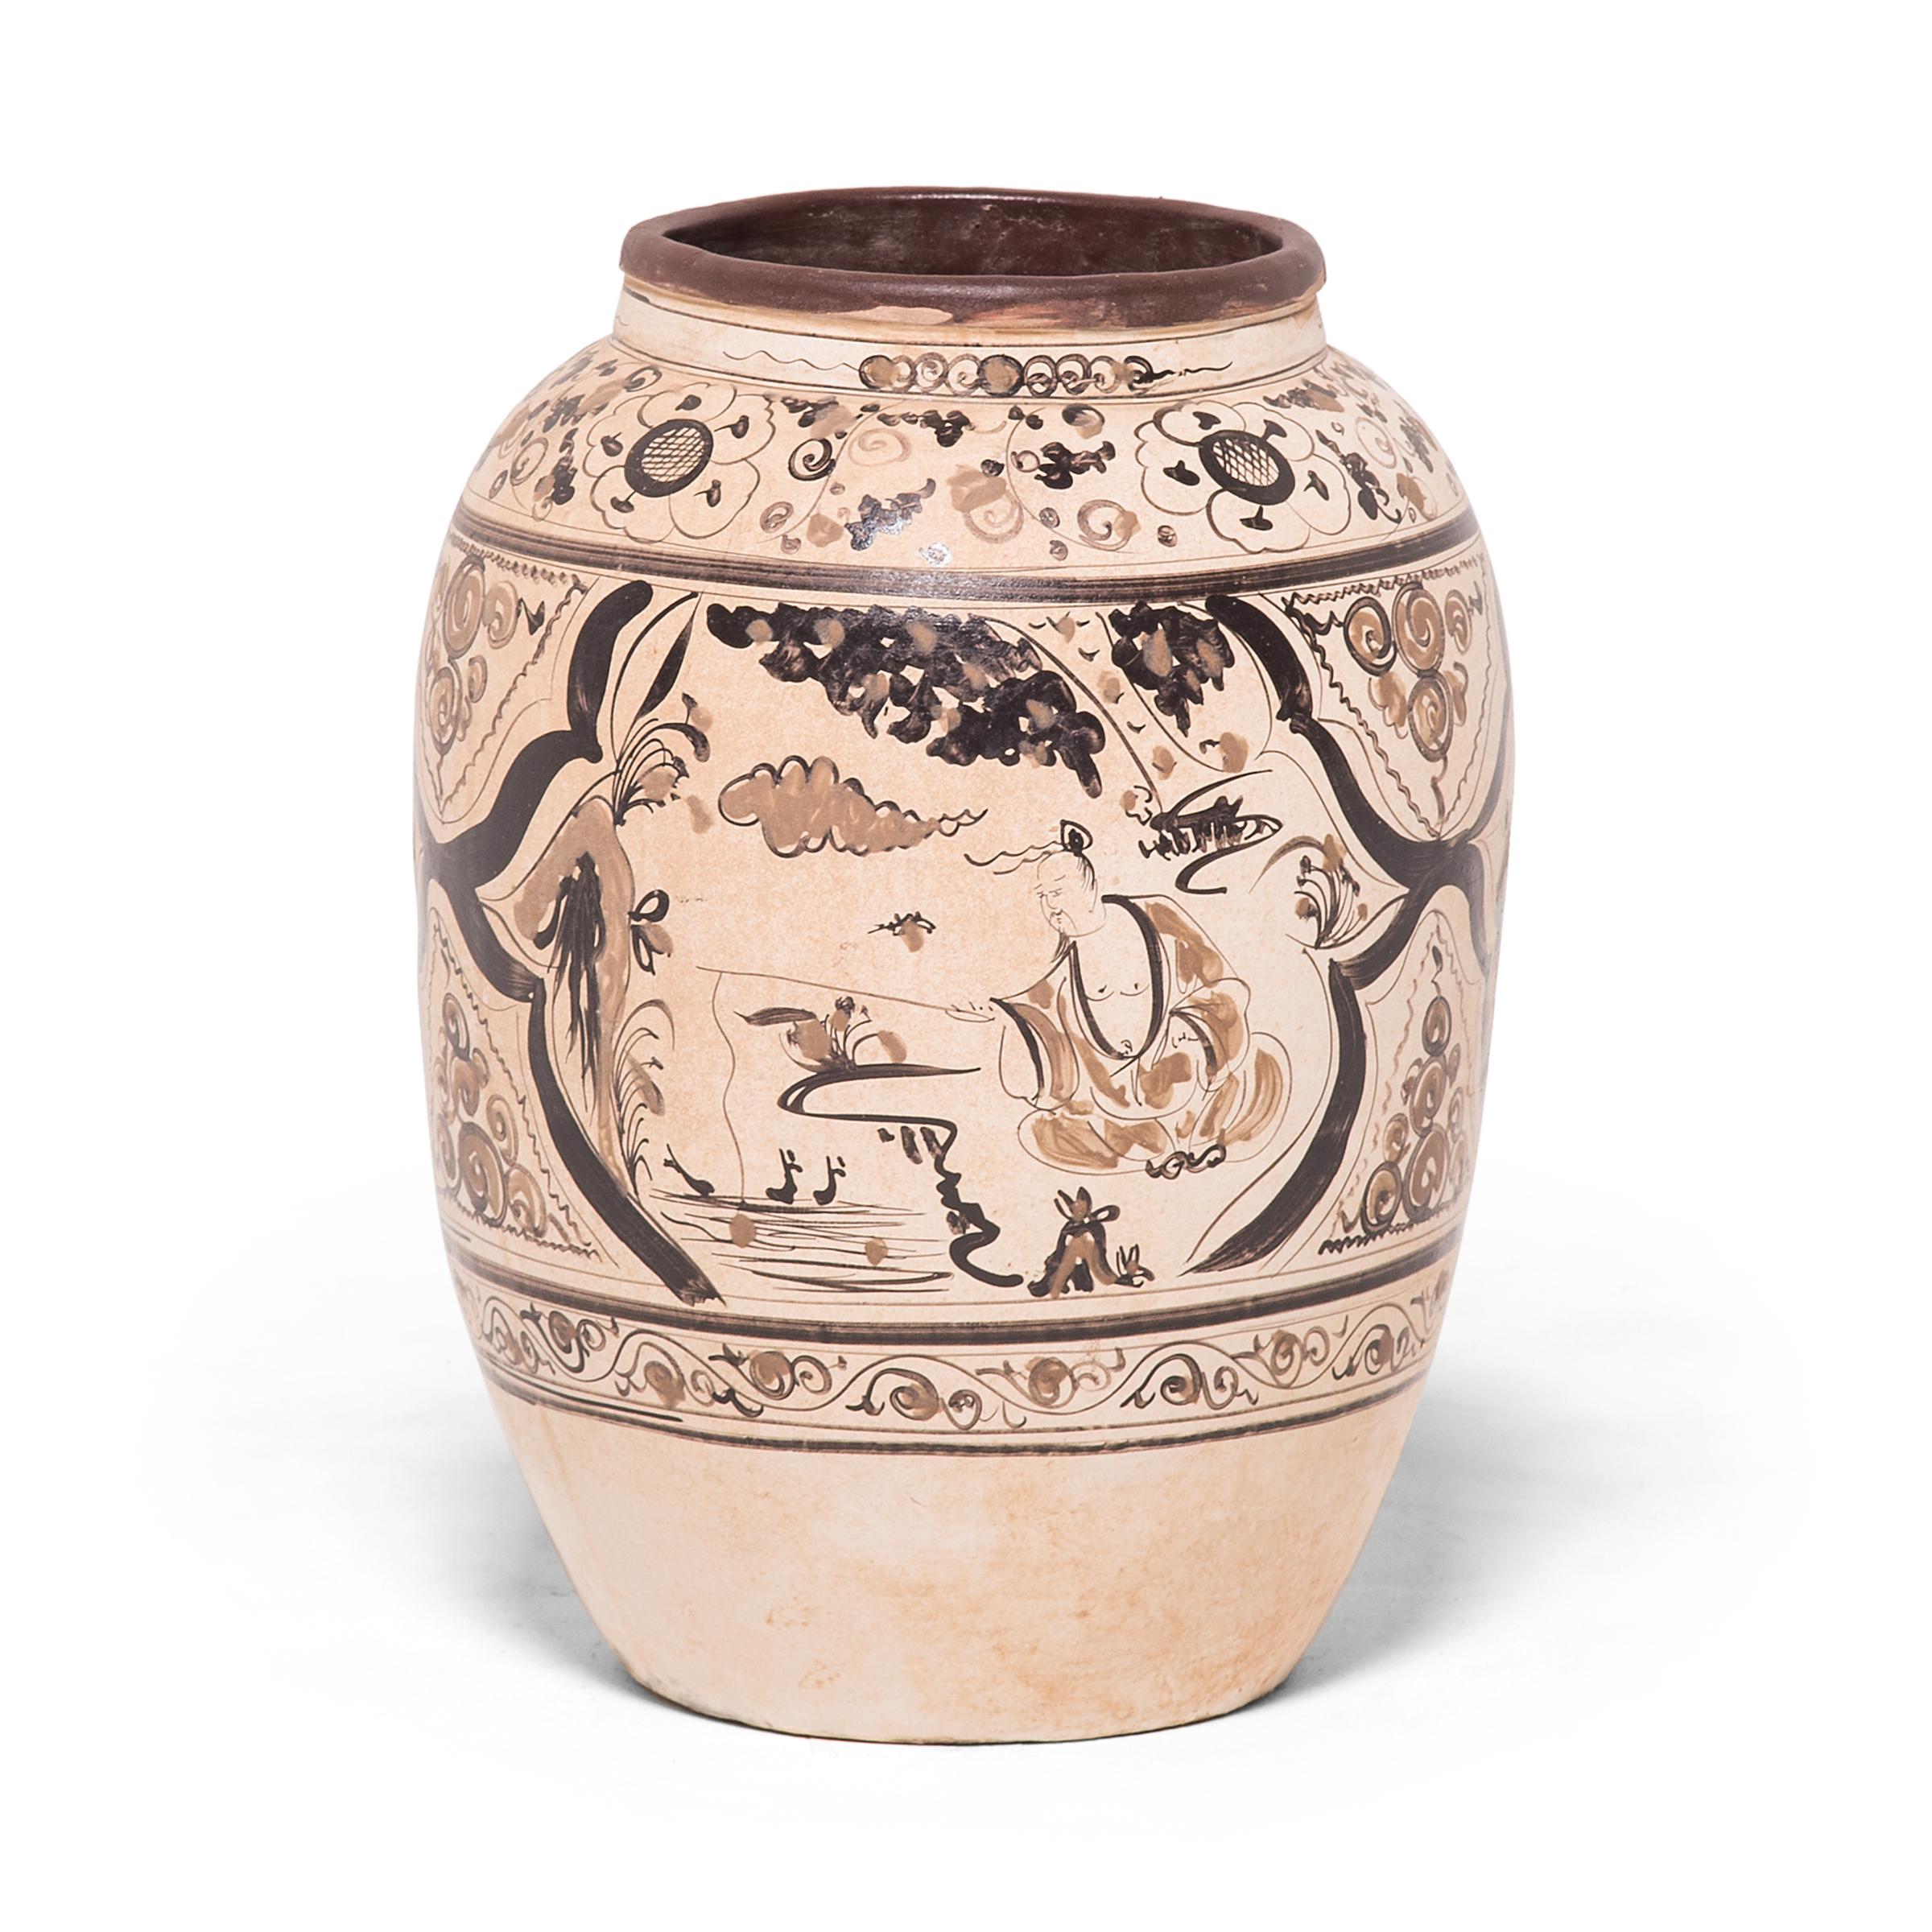 Painted in the style of Ming-dynasty cizhou ware, this early 20th century wine jar is hand painted with gestural brushstrokes of warm browns atop a creamy-white slip base. Horizontal bands of trailing vines and floral motifs frame scenes of a